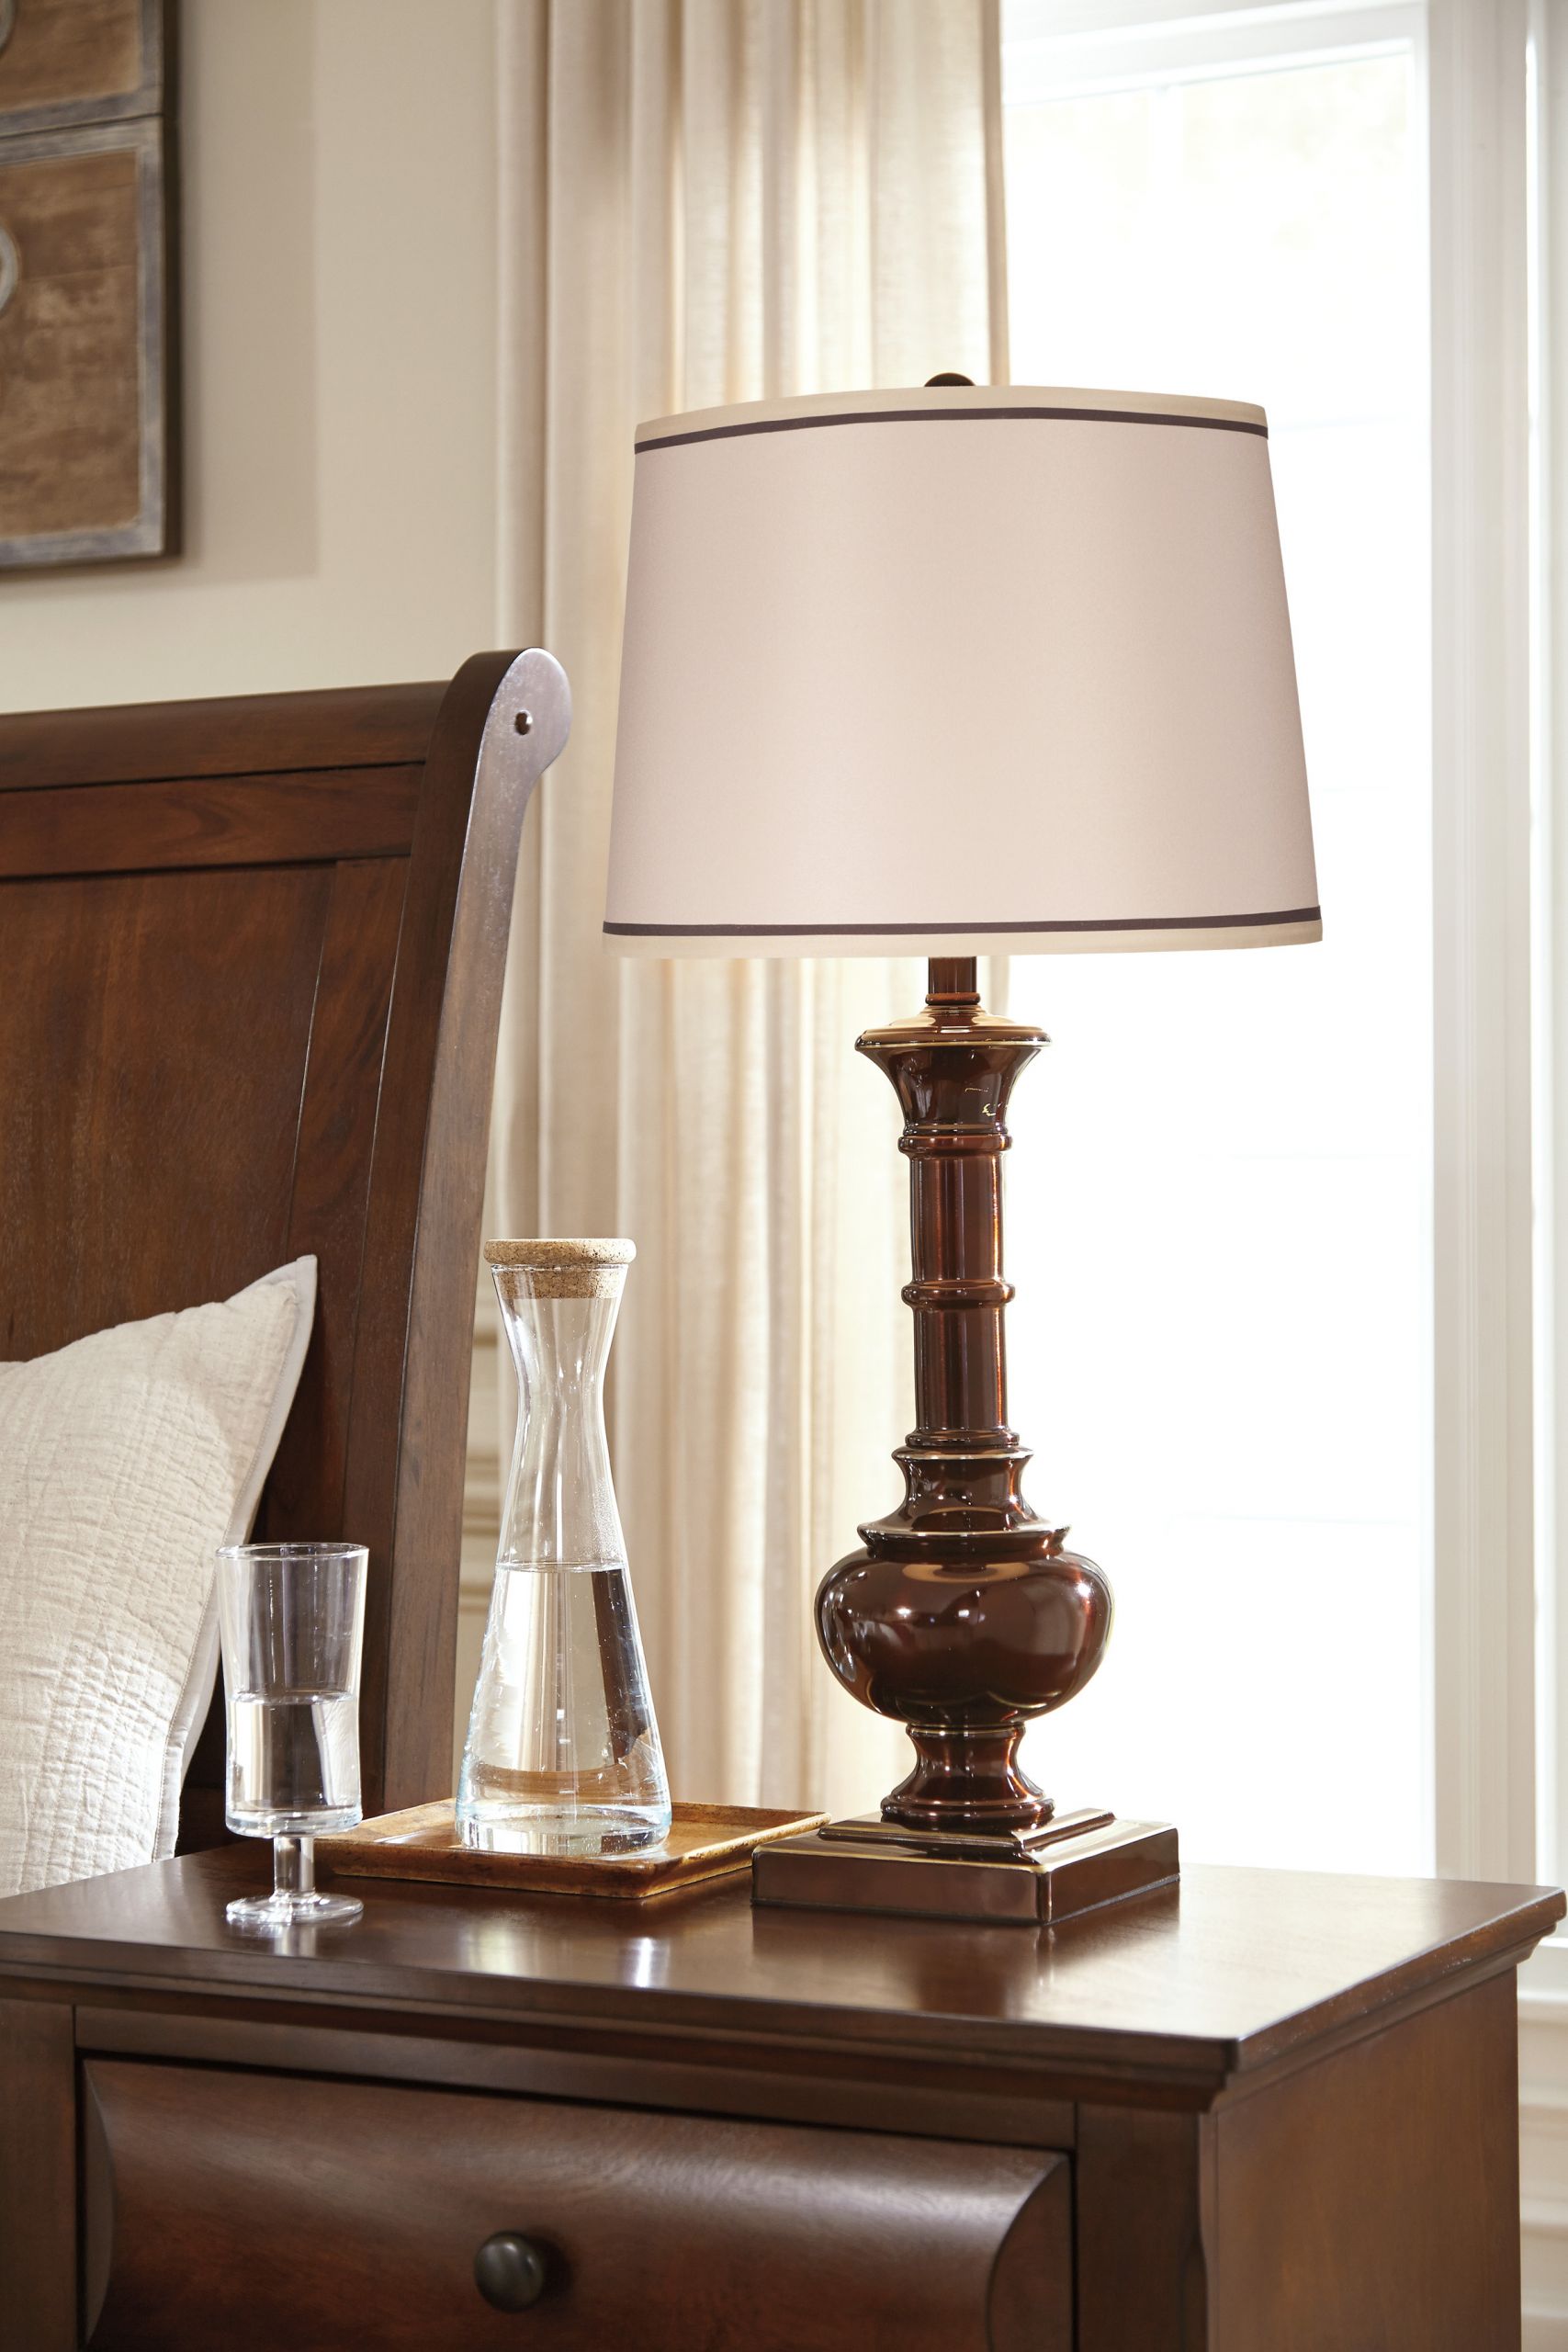 Living Room Lamp Table
 Bronze table lamps for living room – Lighting and Ceiling Fans